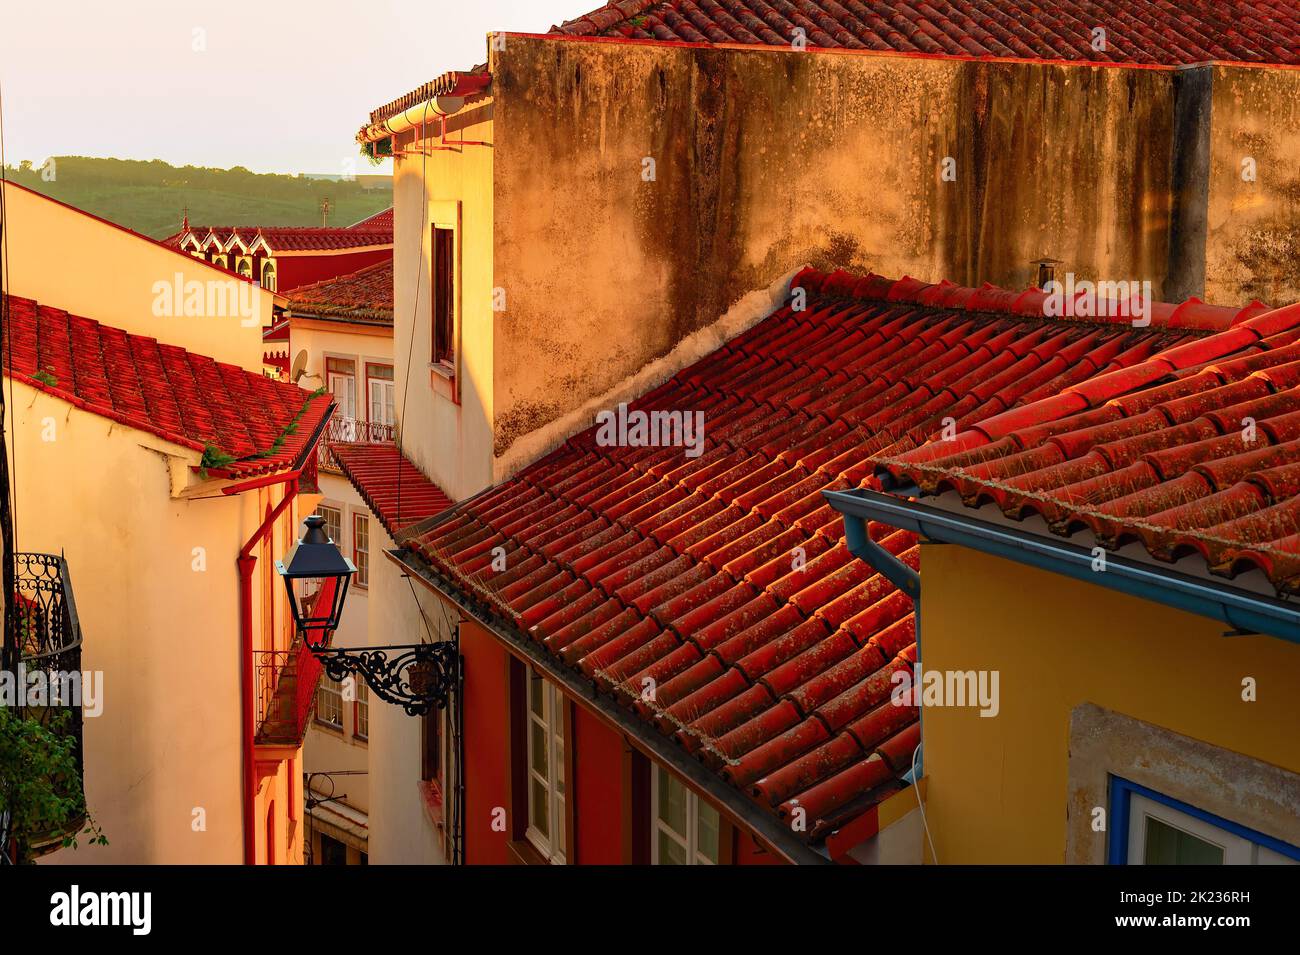 Narrow street with traditional architecture in susnet light, red rooftops, vintage lantern, Porto, Portugal Stock Photo